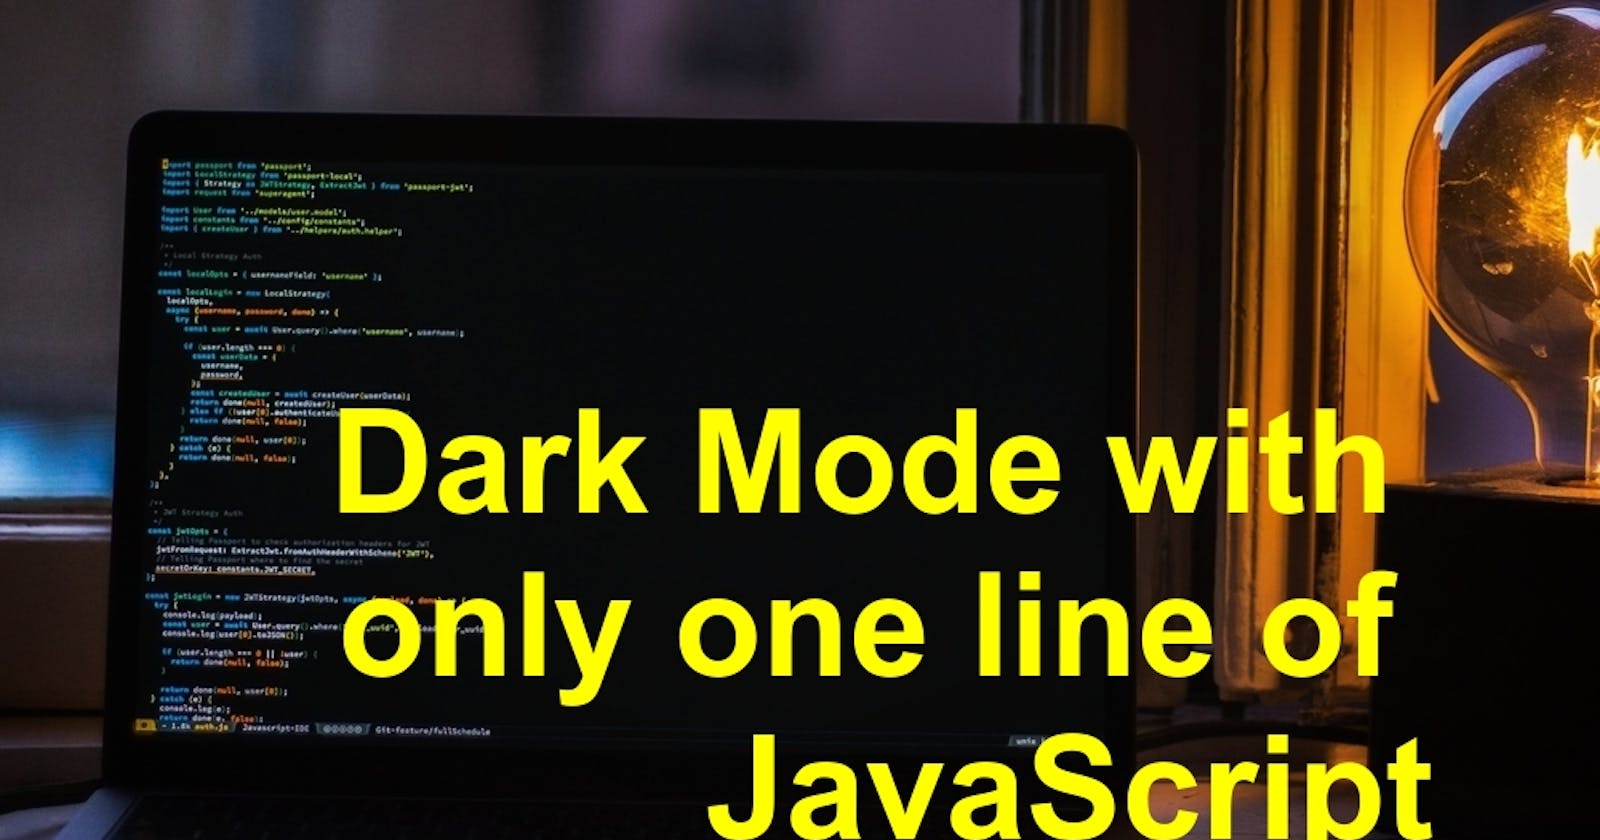 Dark Mode with only one line of JavaScript 😎